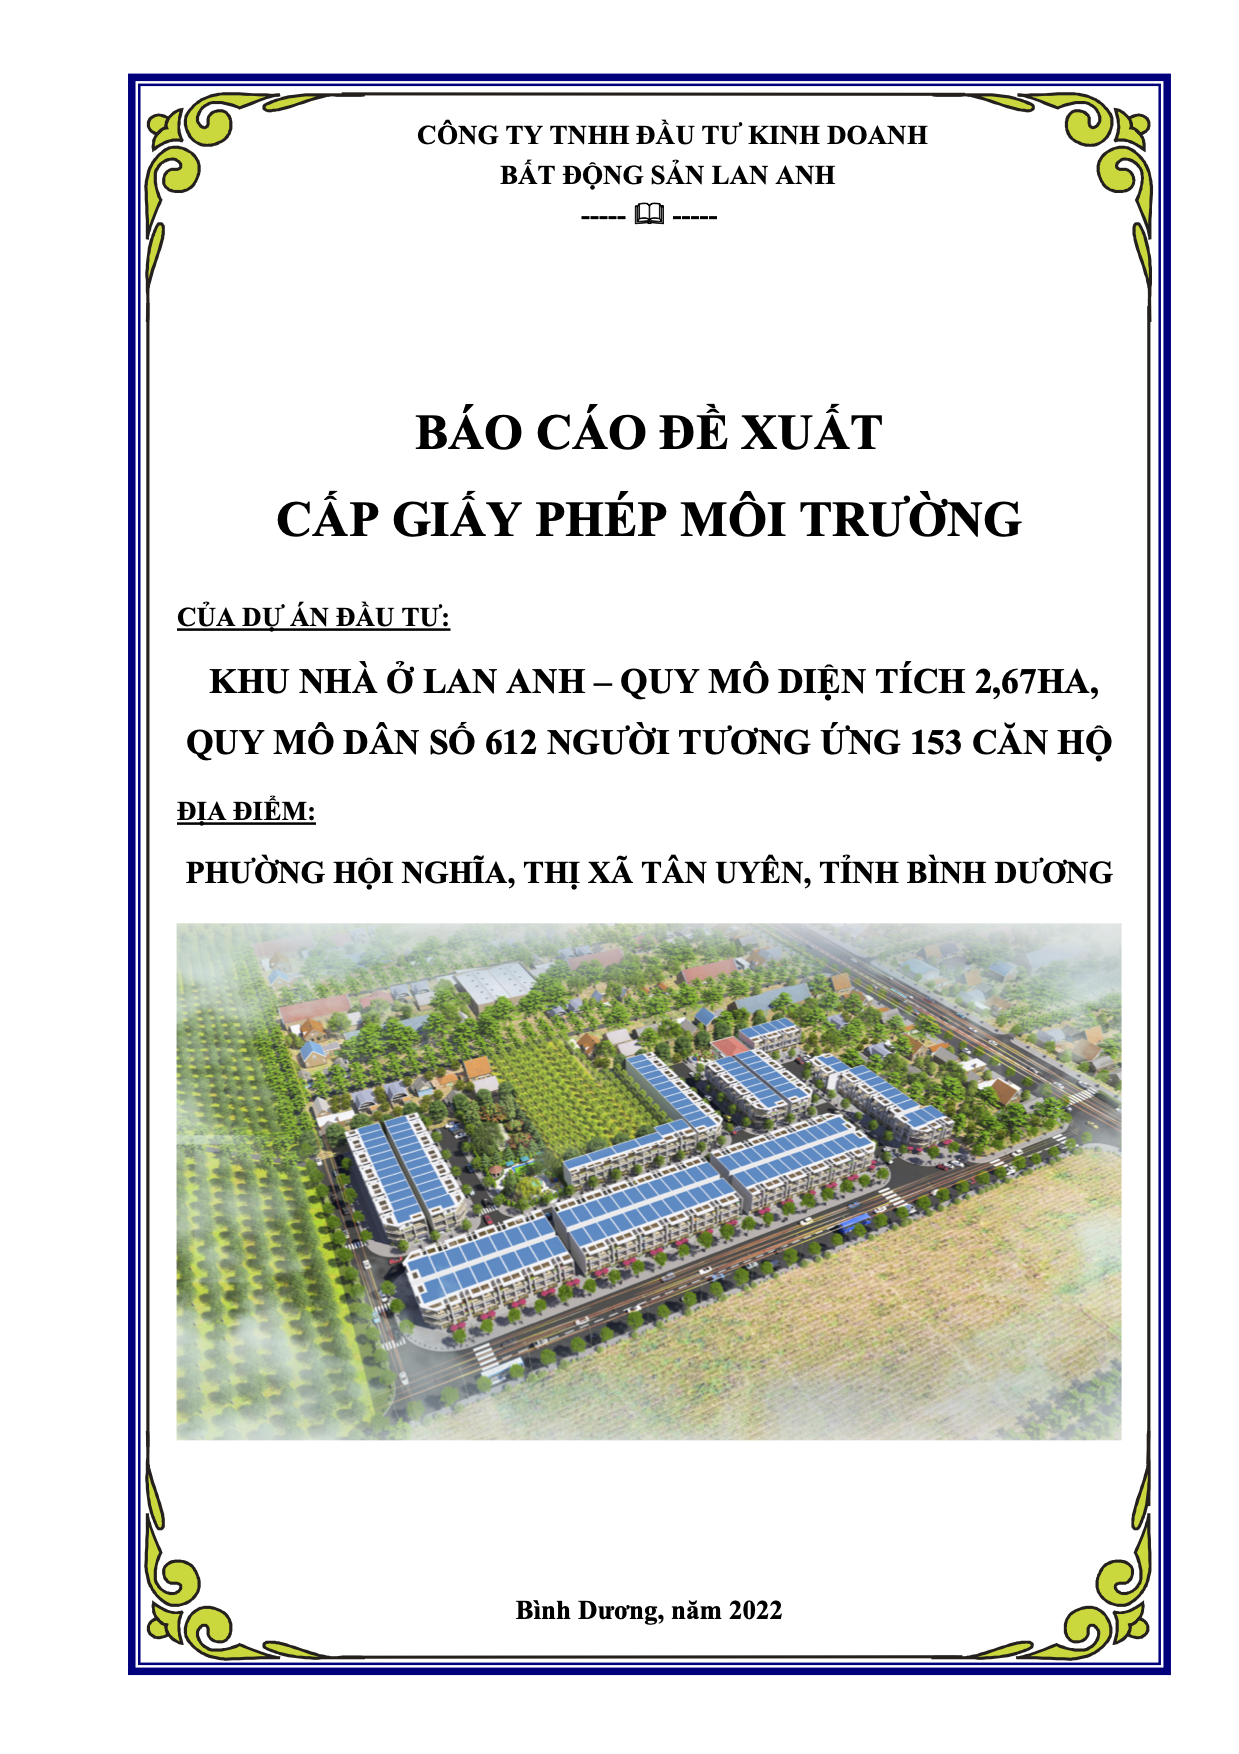 GPMT - LAN ANH RESIDENCE INVESTMENT PROJECT, AREA 2.67 HA, POPULATION 612 PEOPLE, 153 APARTMENTS